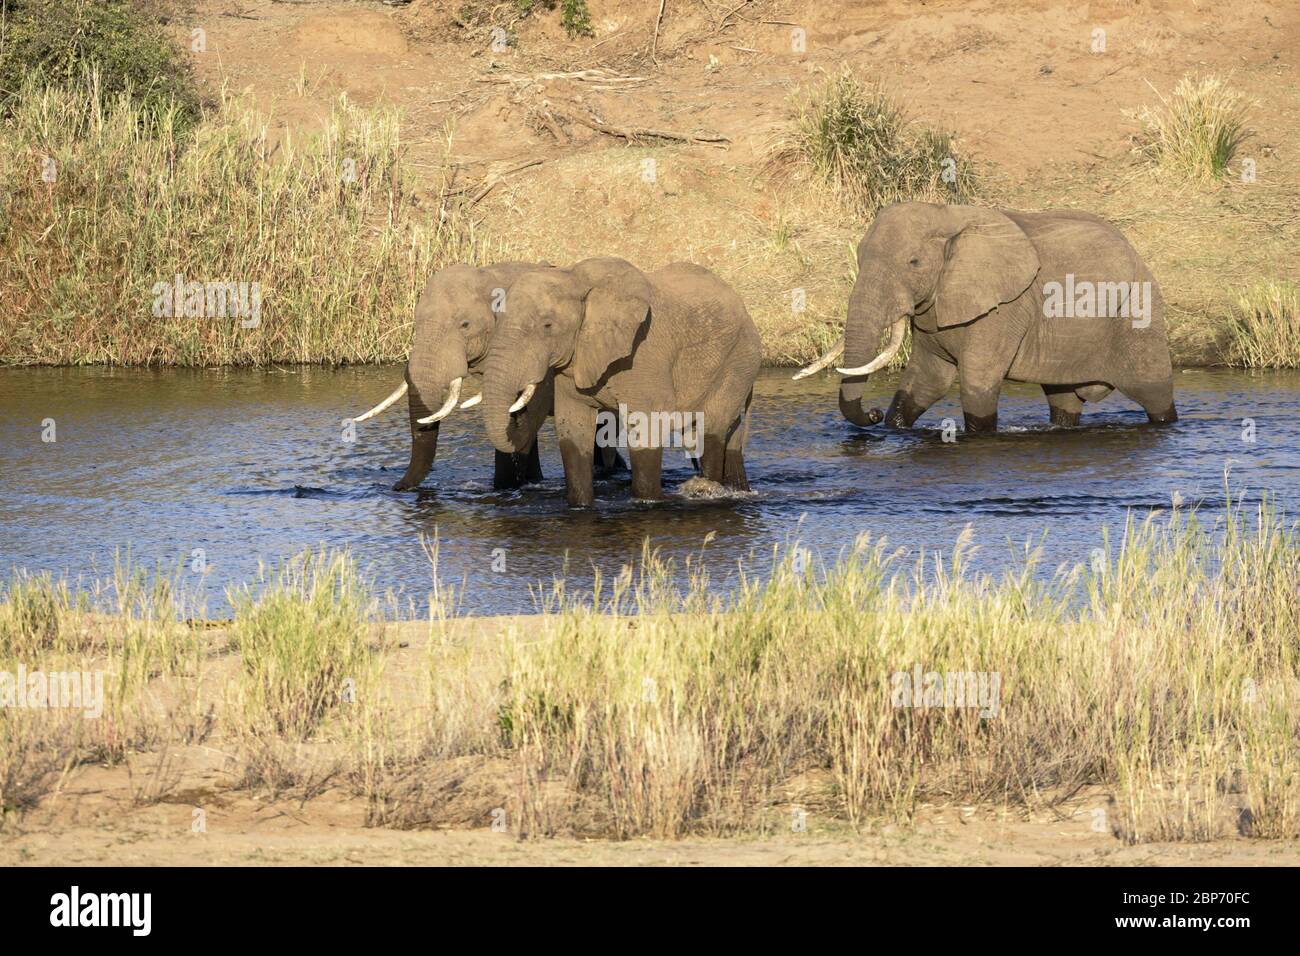 Three adult male African Elephants walk through a river in South Africa Kruger Park Stock Photo